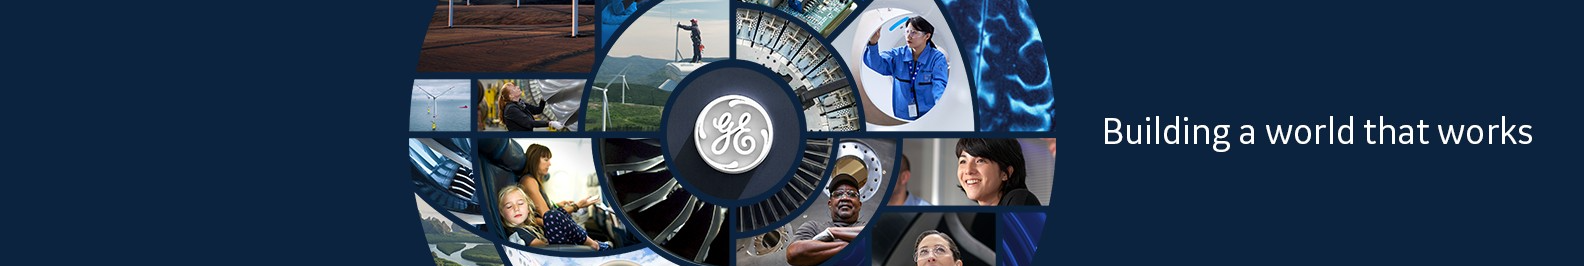 GE Healthcare background